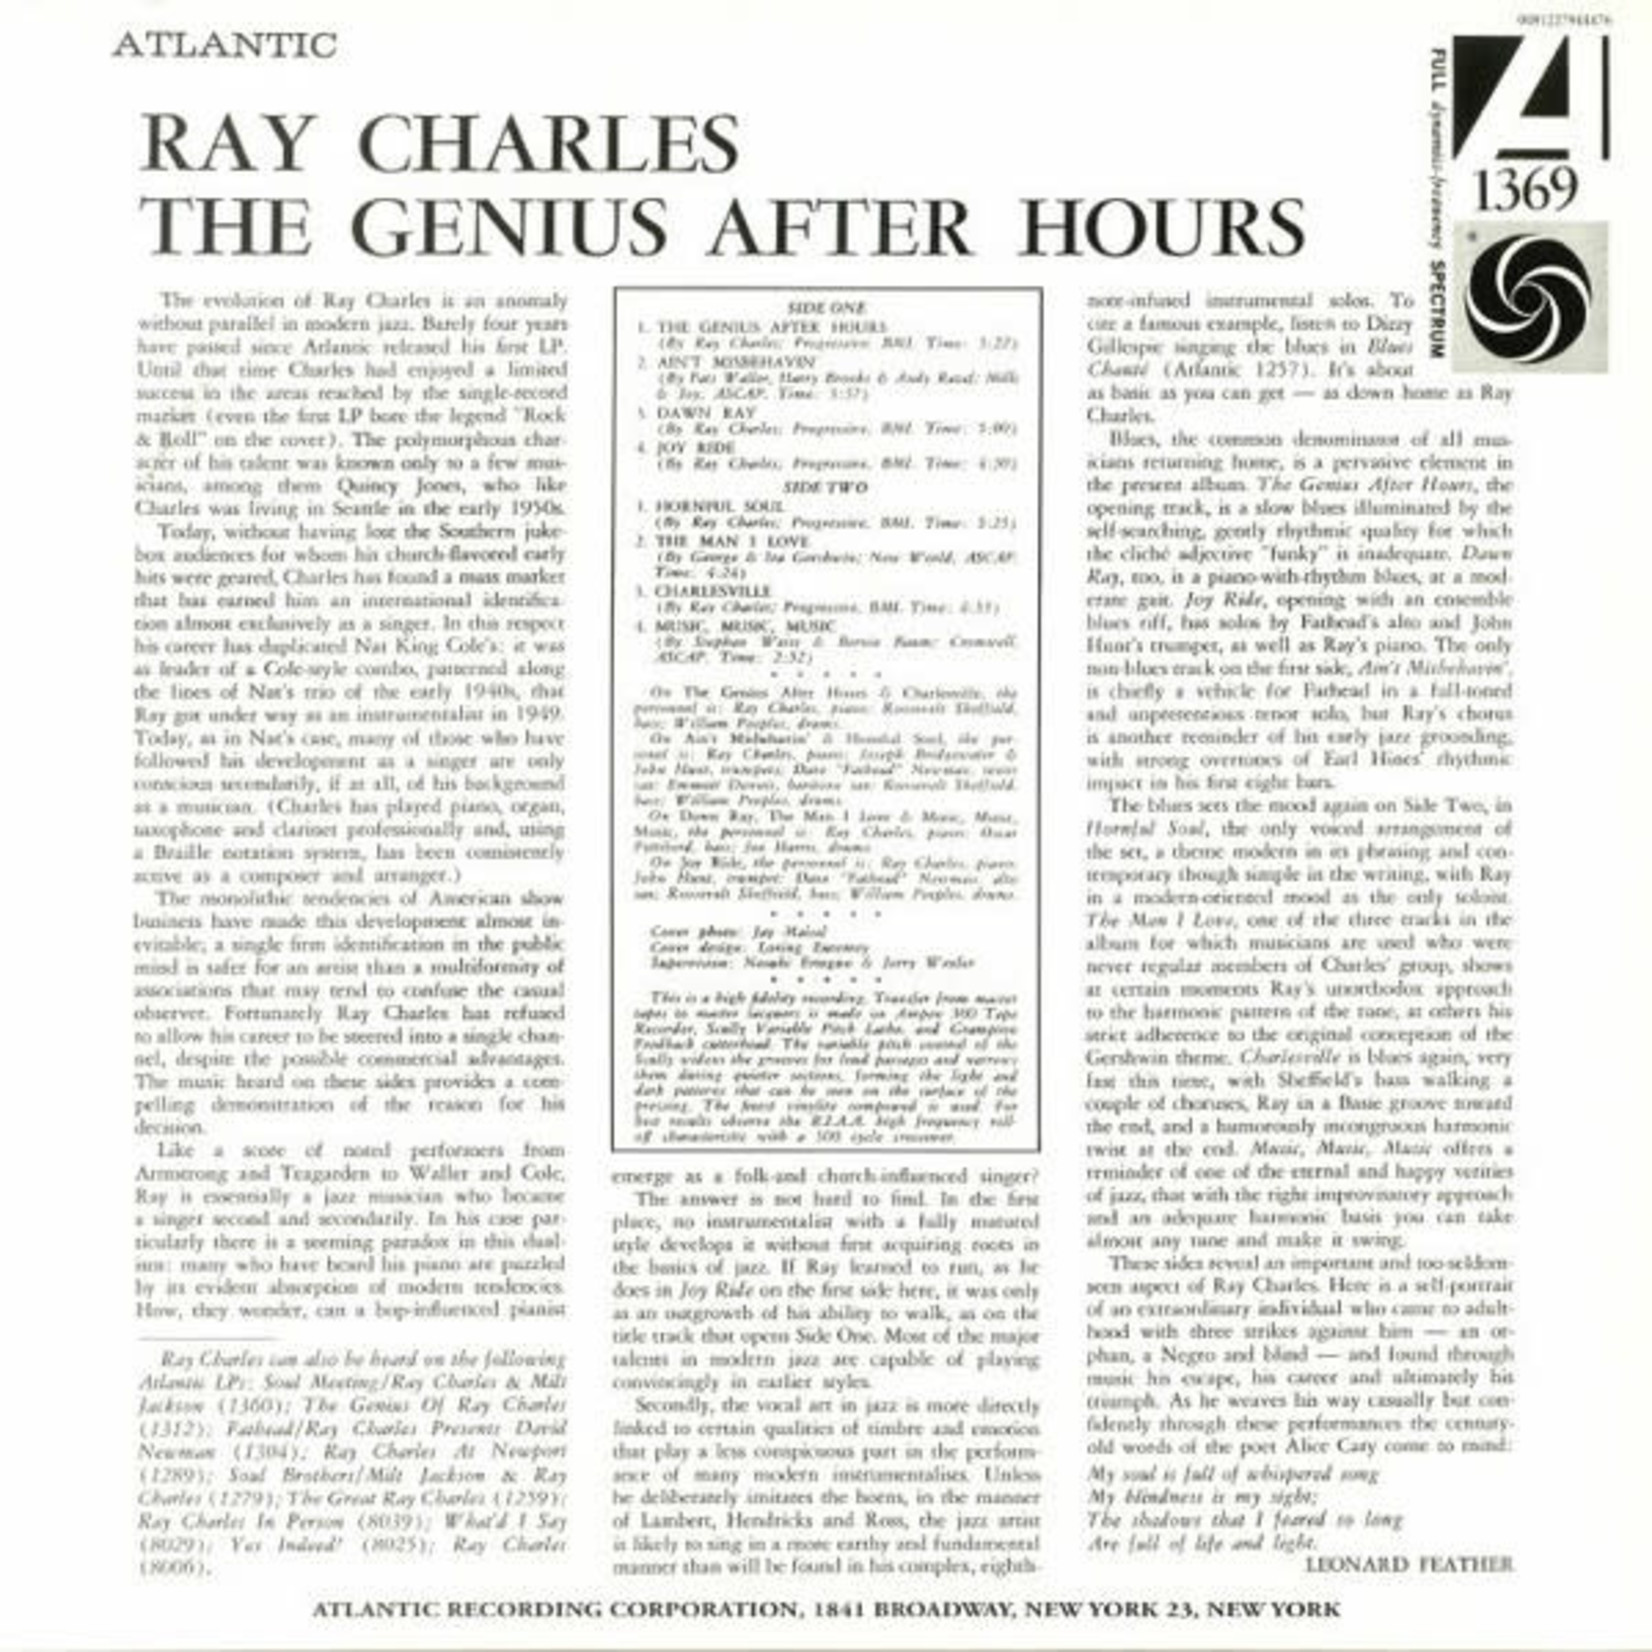 Atlantic Ray Charles - The Genius After Hours (LP)